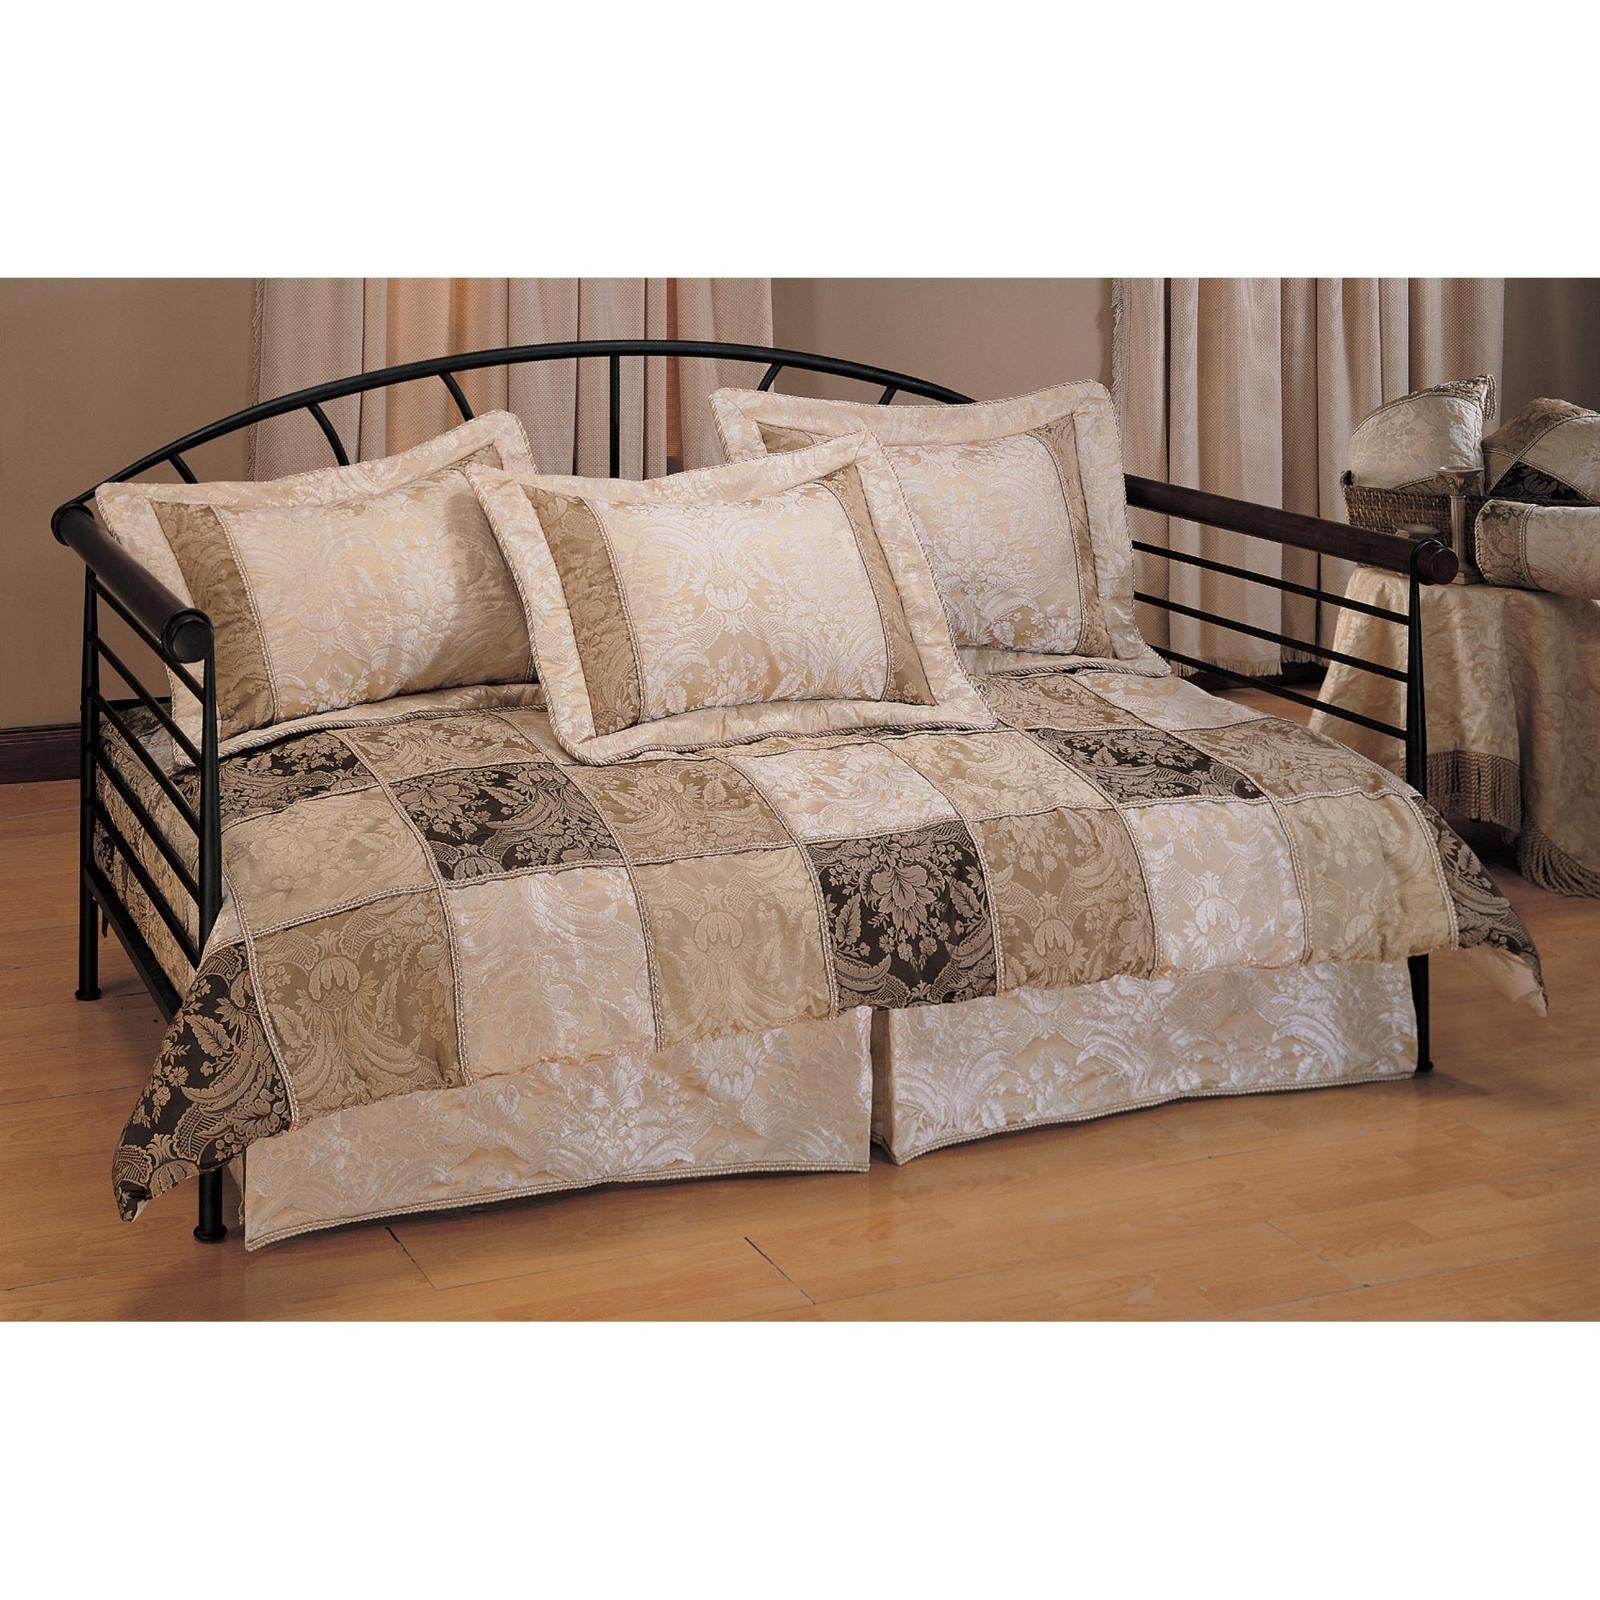 full daybed bedding sets photo - 6